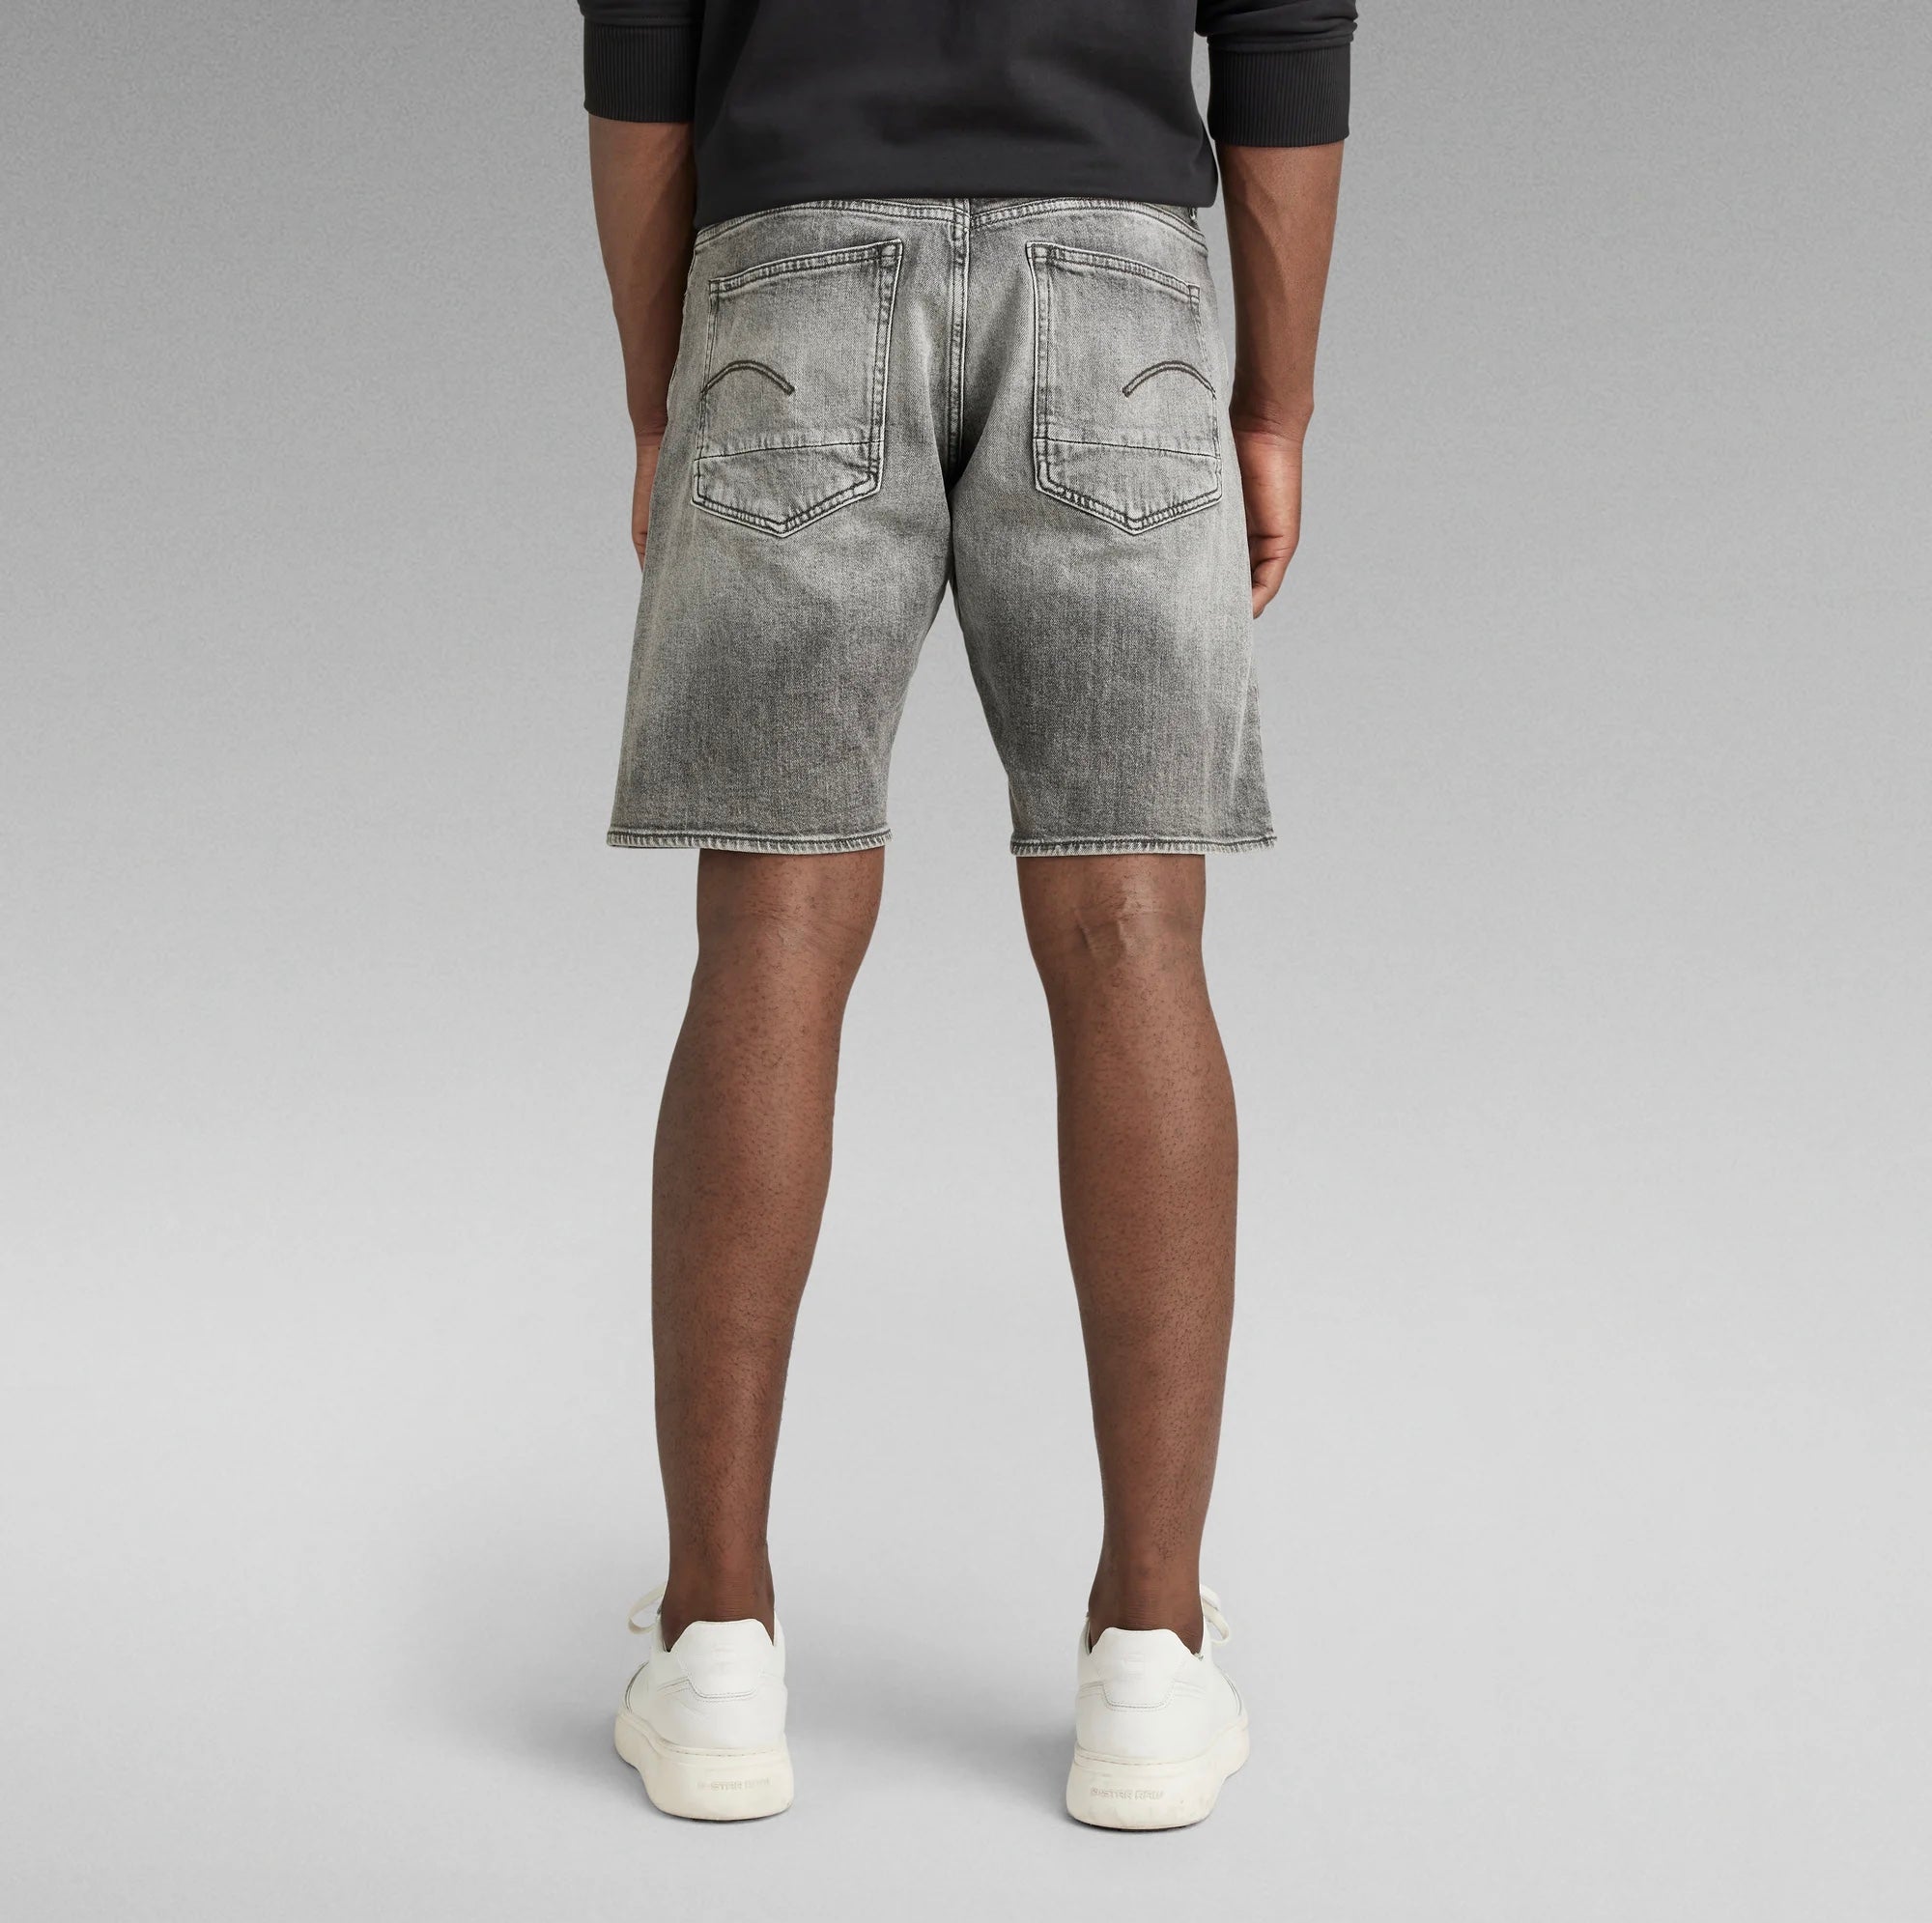 G-Star Raw Men’s Triple A Short Faded Carbon